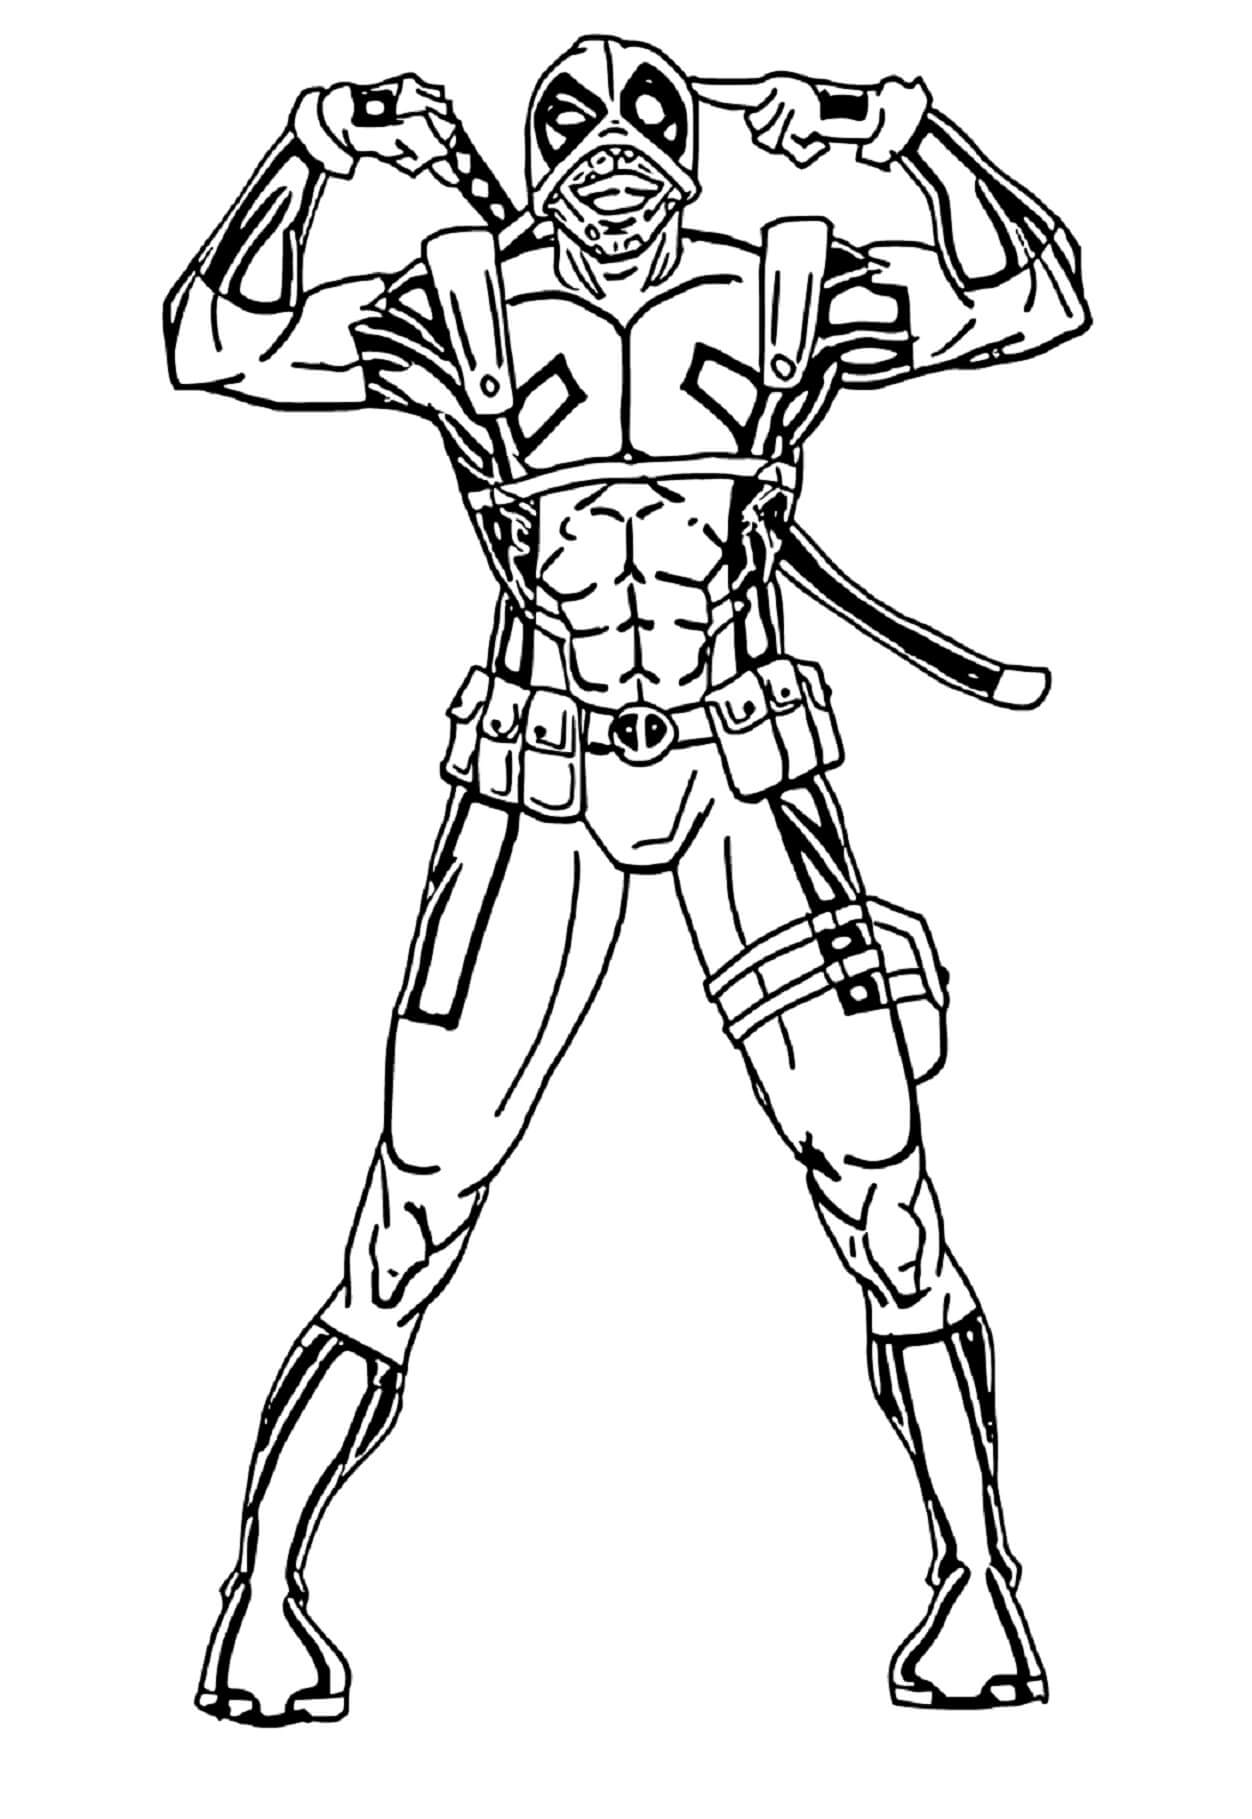 Drawing Deadpool coloring page - Download, Print or Color Online for Free